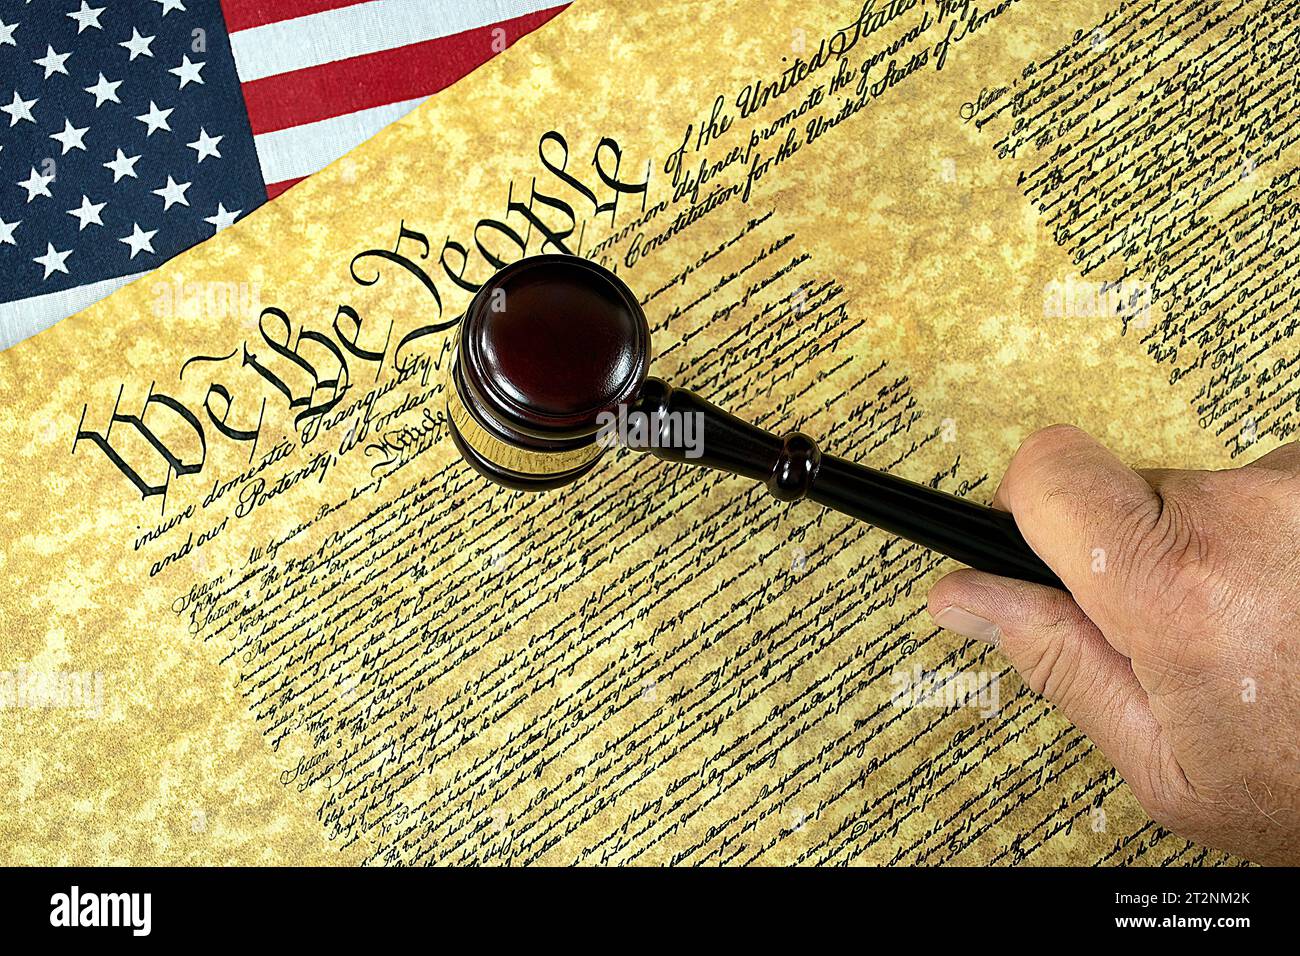 Man's hand holding a judicial gavel on the U.S. Constitution document and American flag Stock Photo